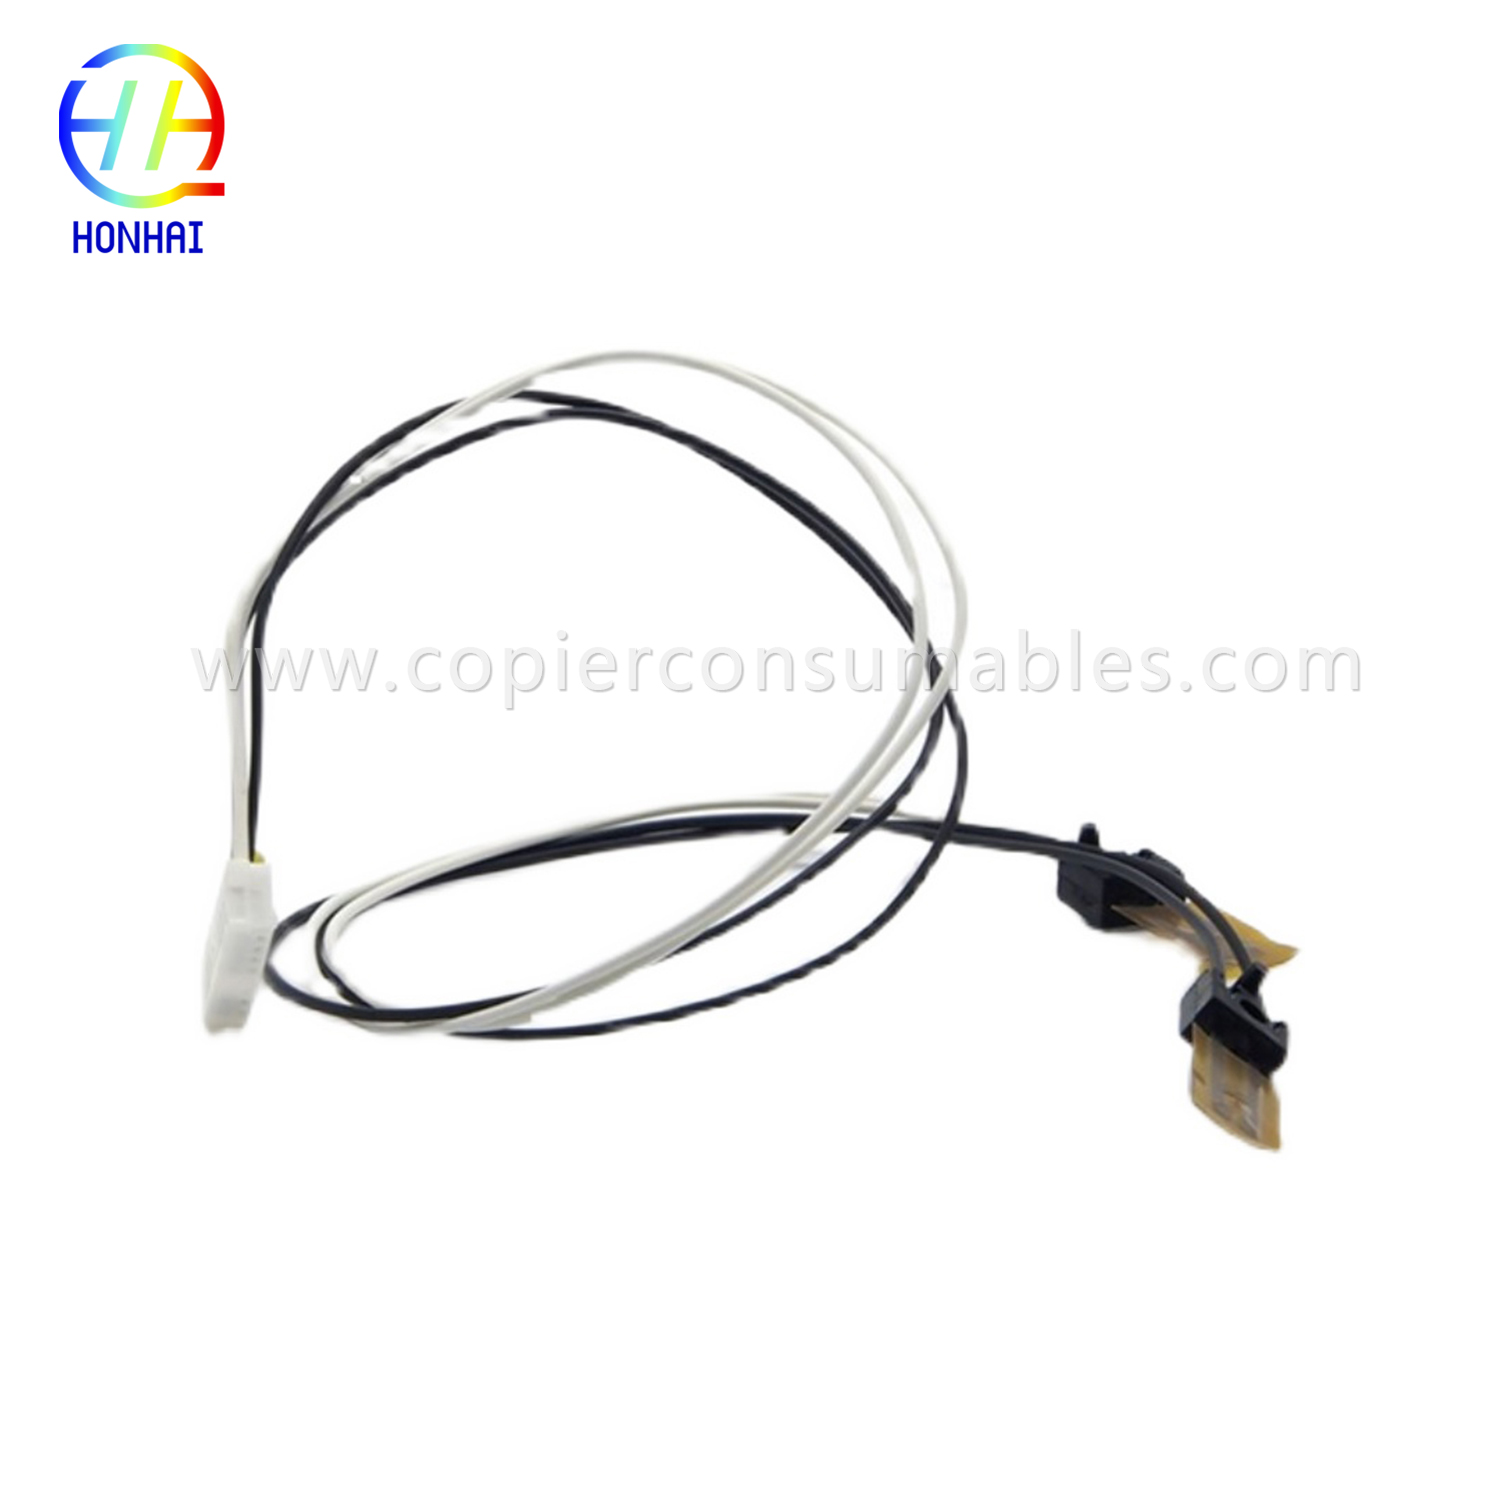 Fuser Thermistor for Ricoh MP 2554 3054 3554 4054 5054 6054 (AW100174)